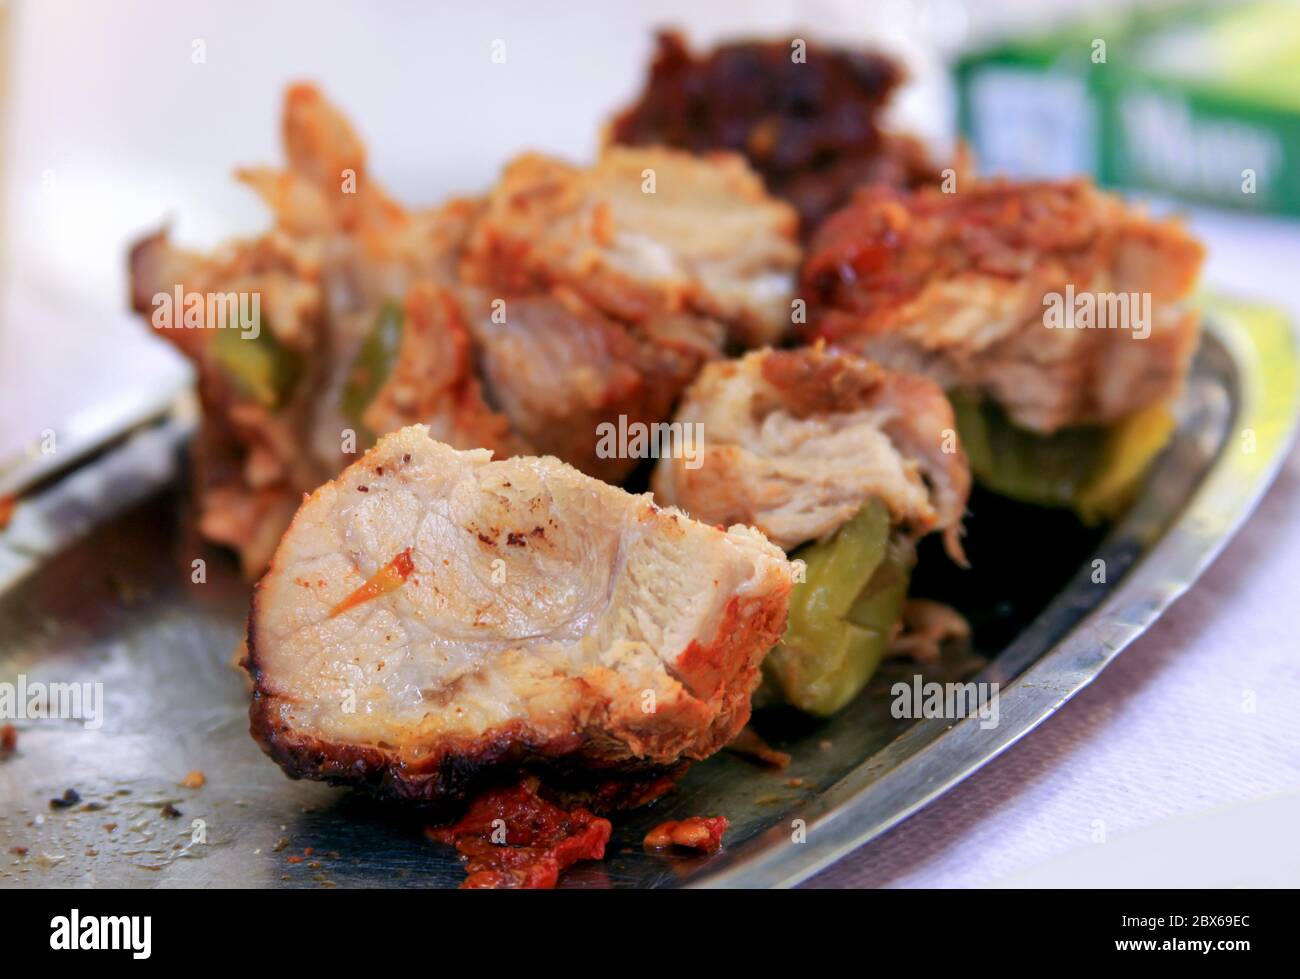 Grilled meat prepared in a traditional greek dish Stock Photo